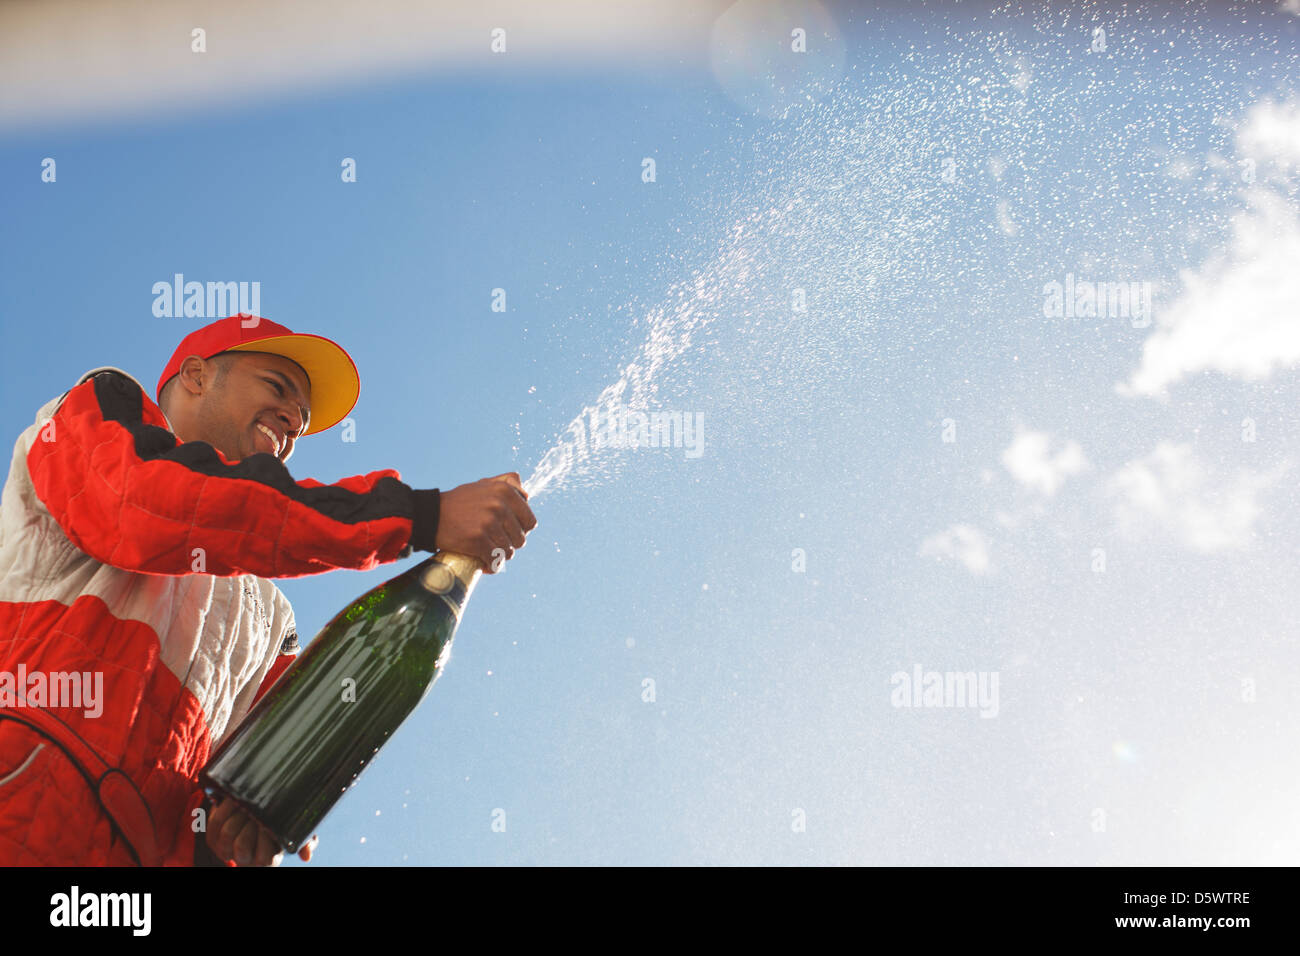 Racer spraying bottle of champagne outdoors Stock Photo